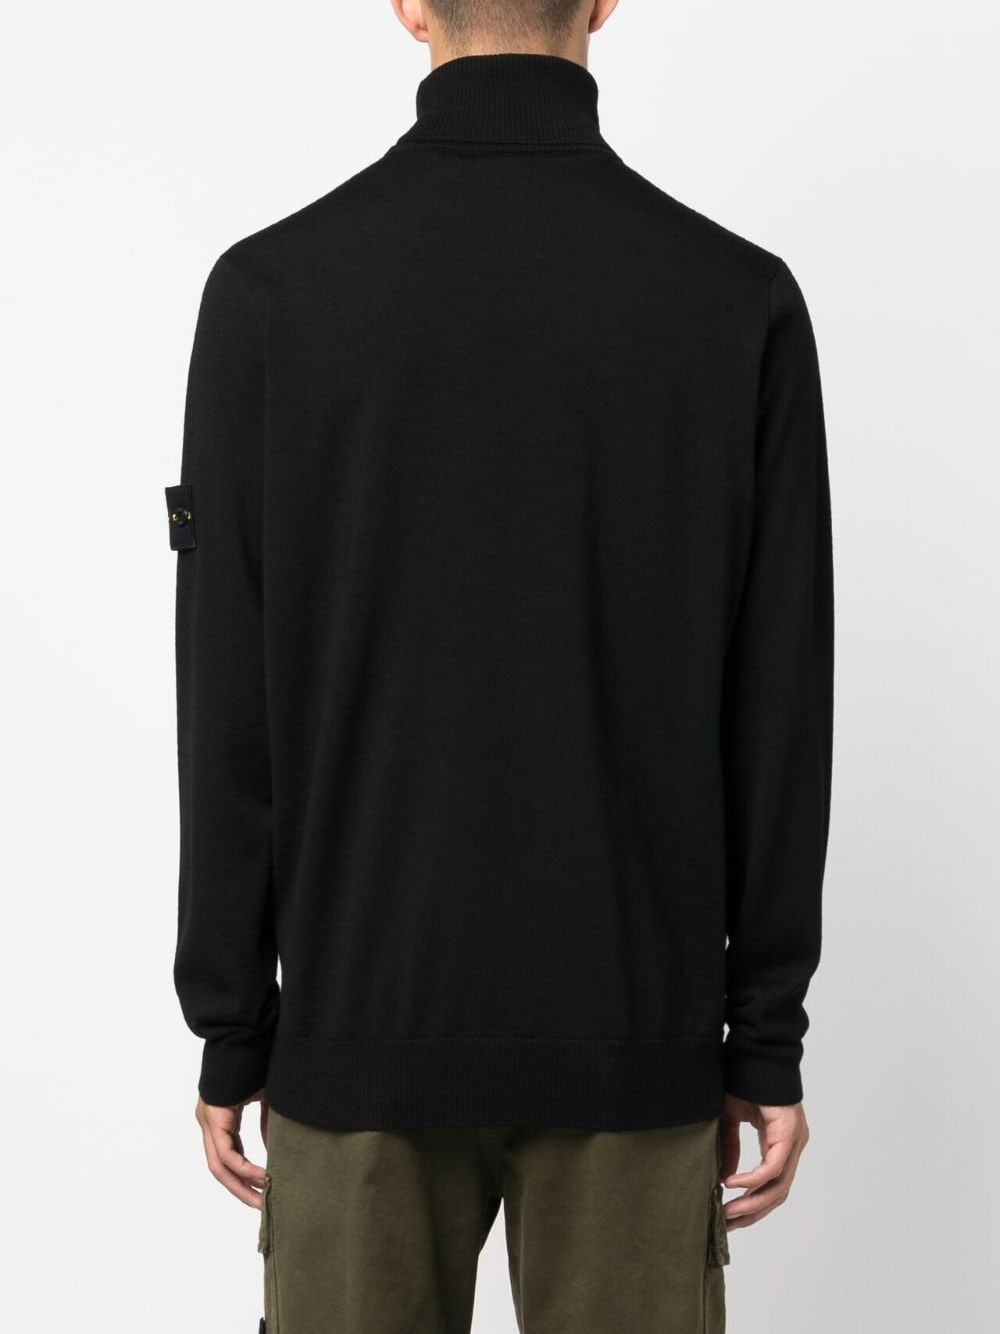 stone island 7915525C4 A0029 BLACK available on montiboutique.com - 56281